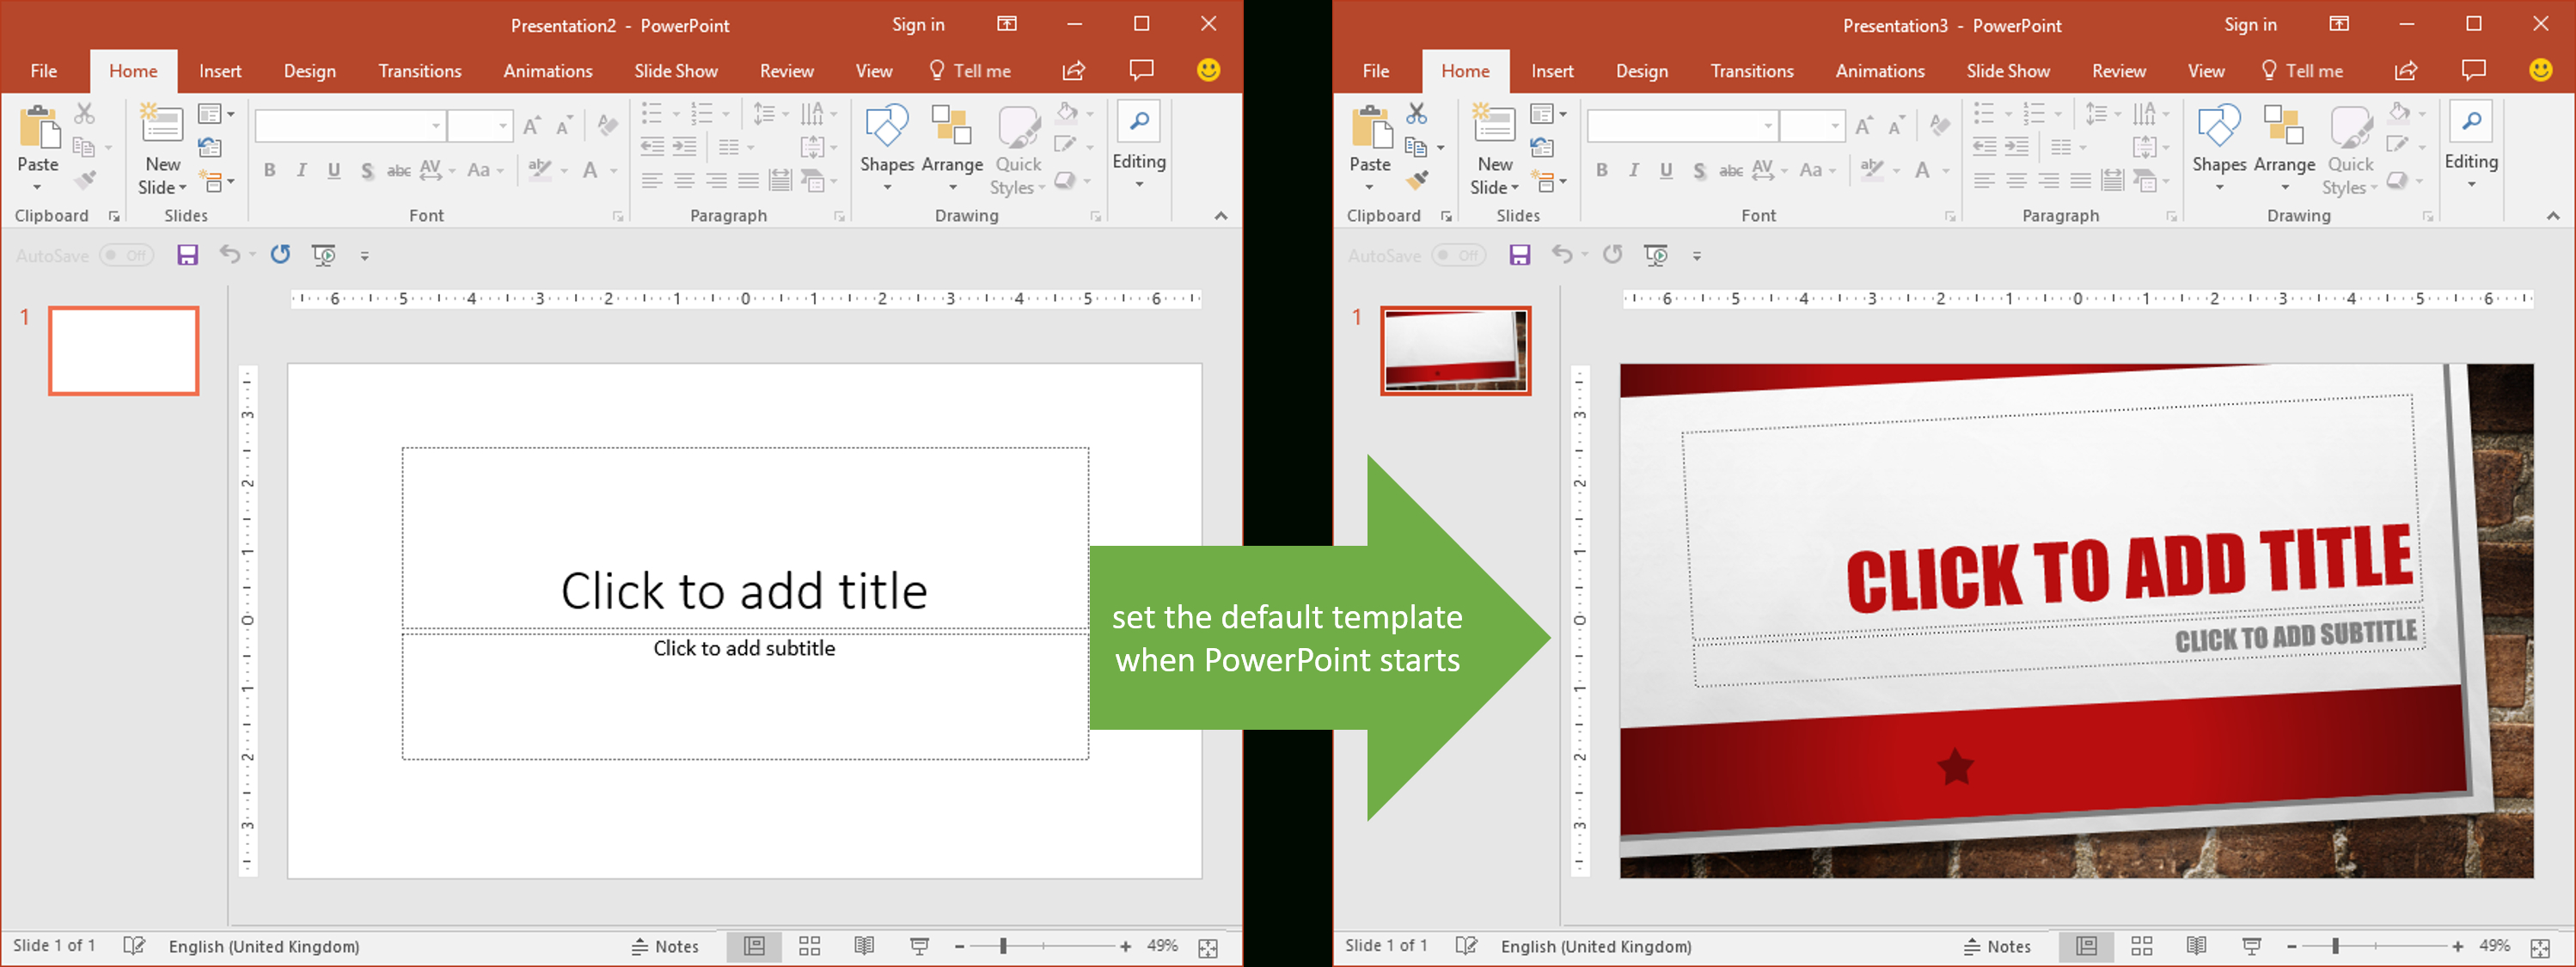 Set The Default Template When Powerpoint Starts | Youpresent In Powerpoint 2013 Template Location